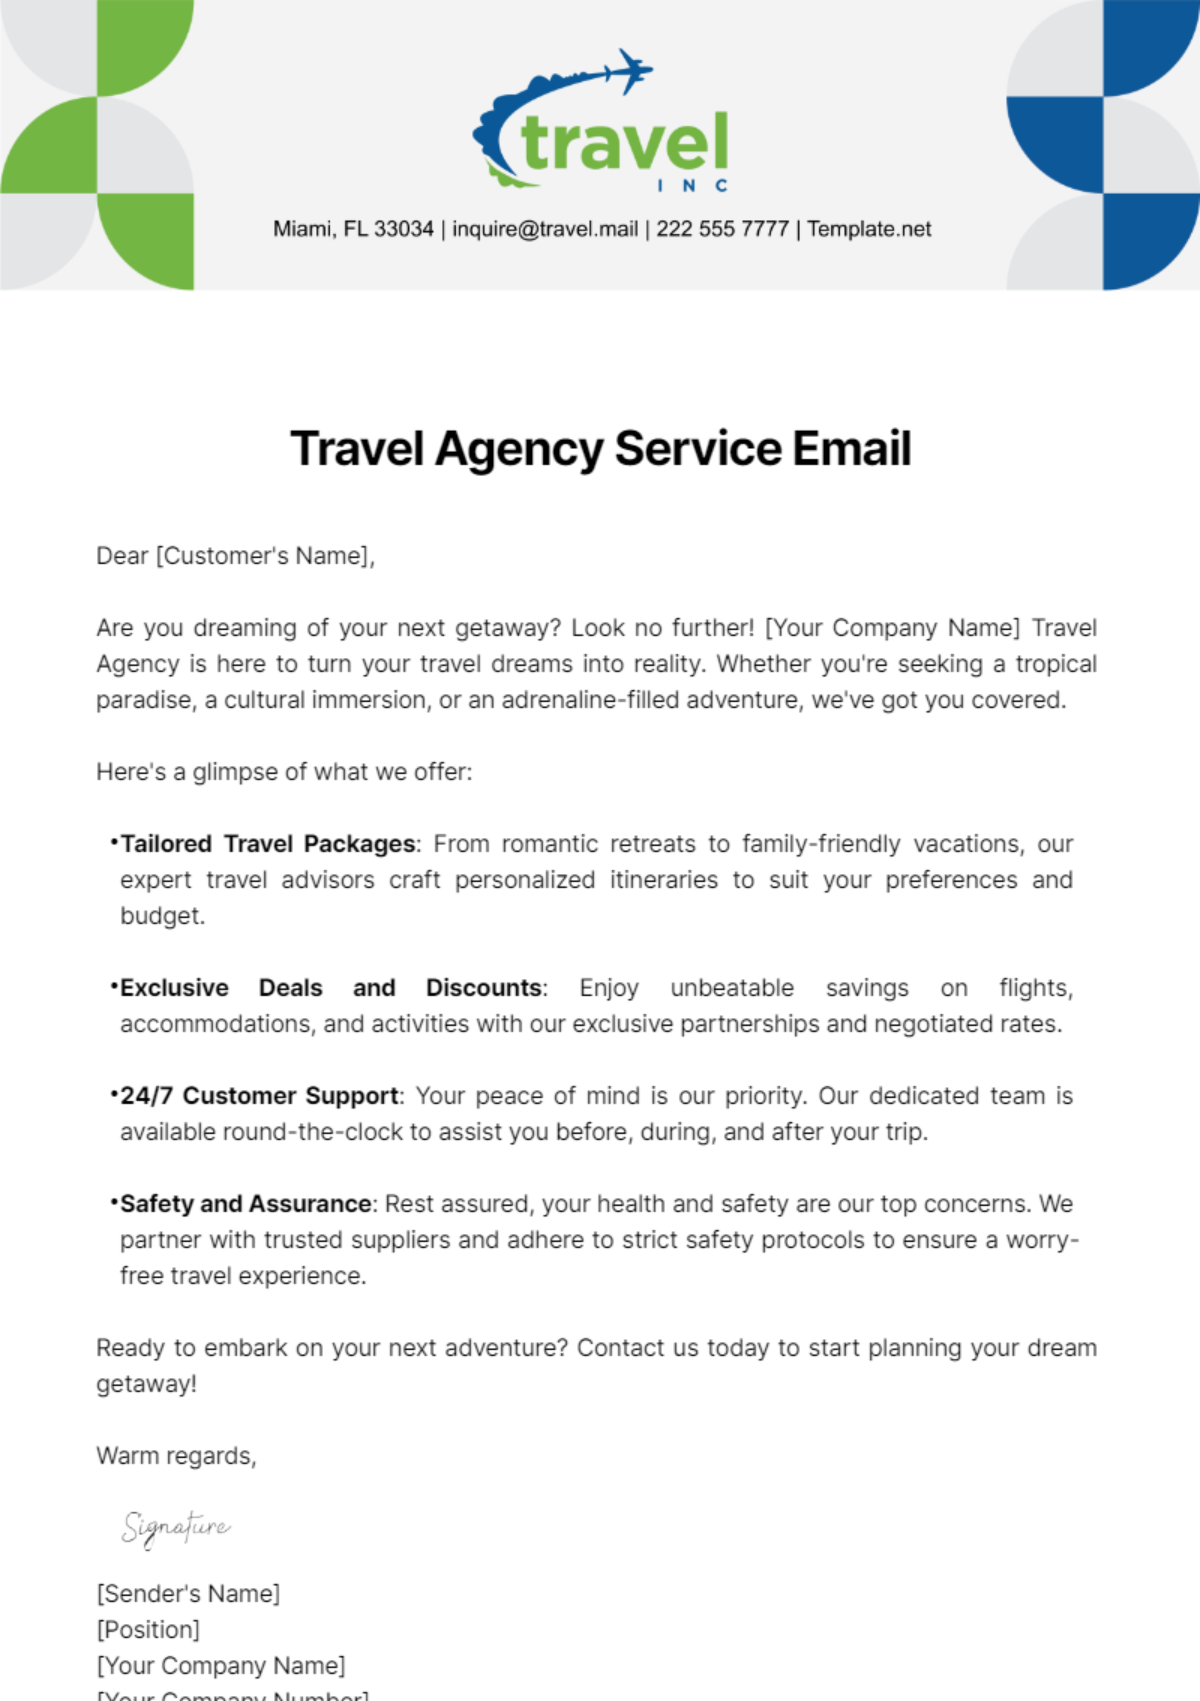 Travel Agency Service Email Template